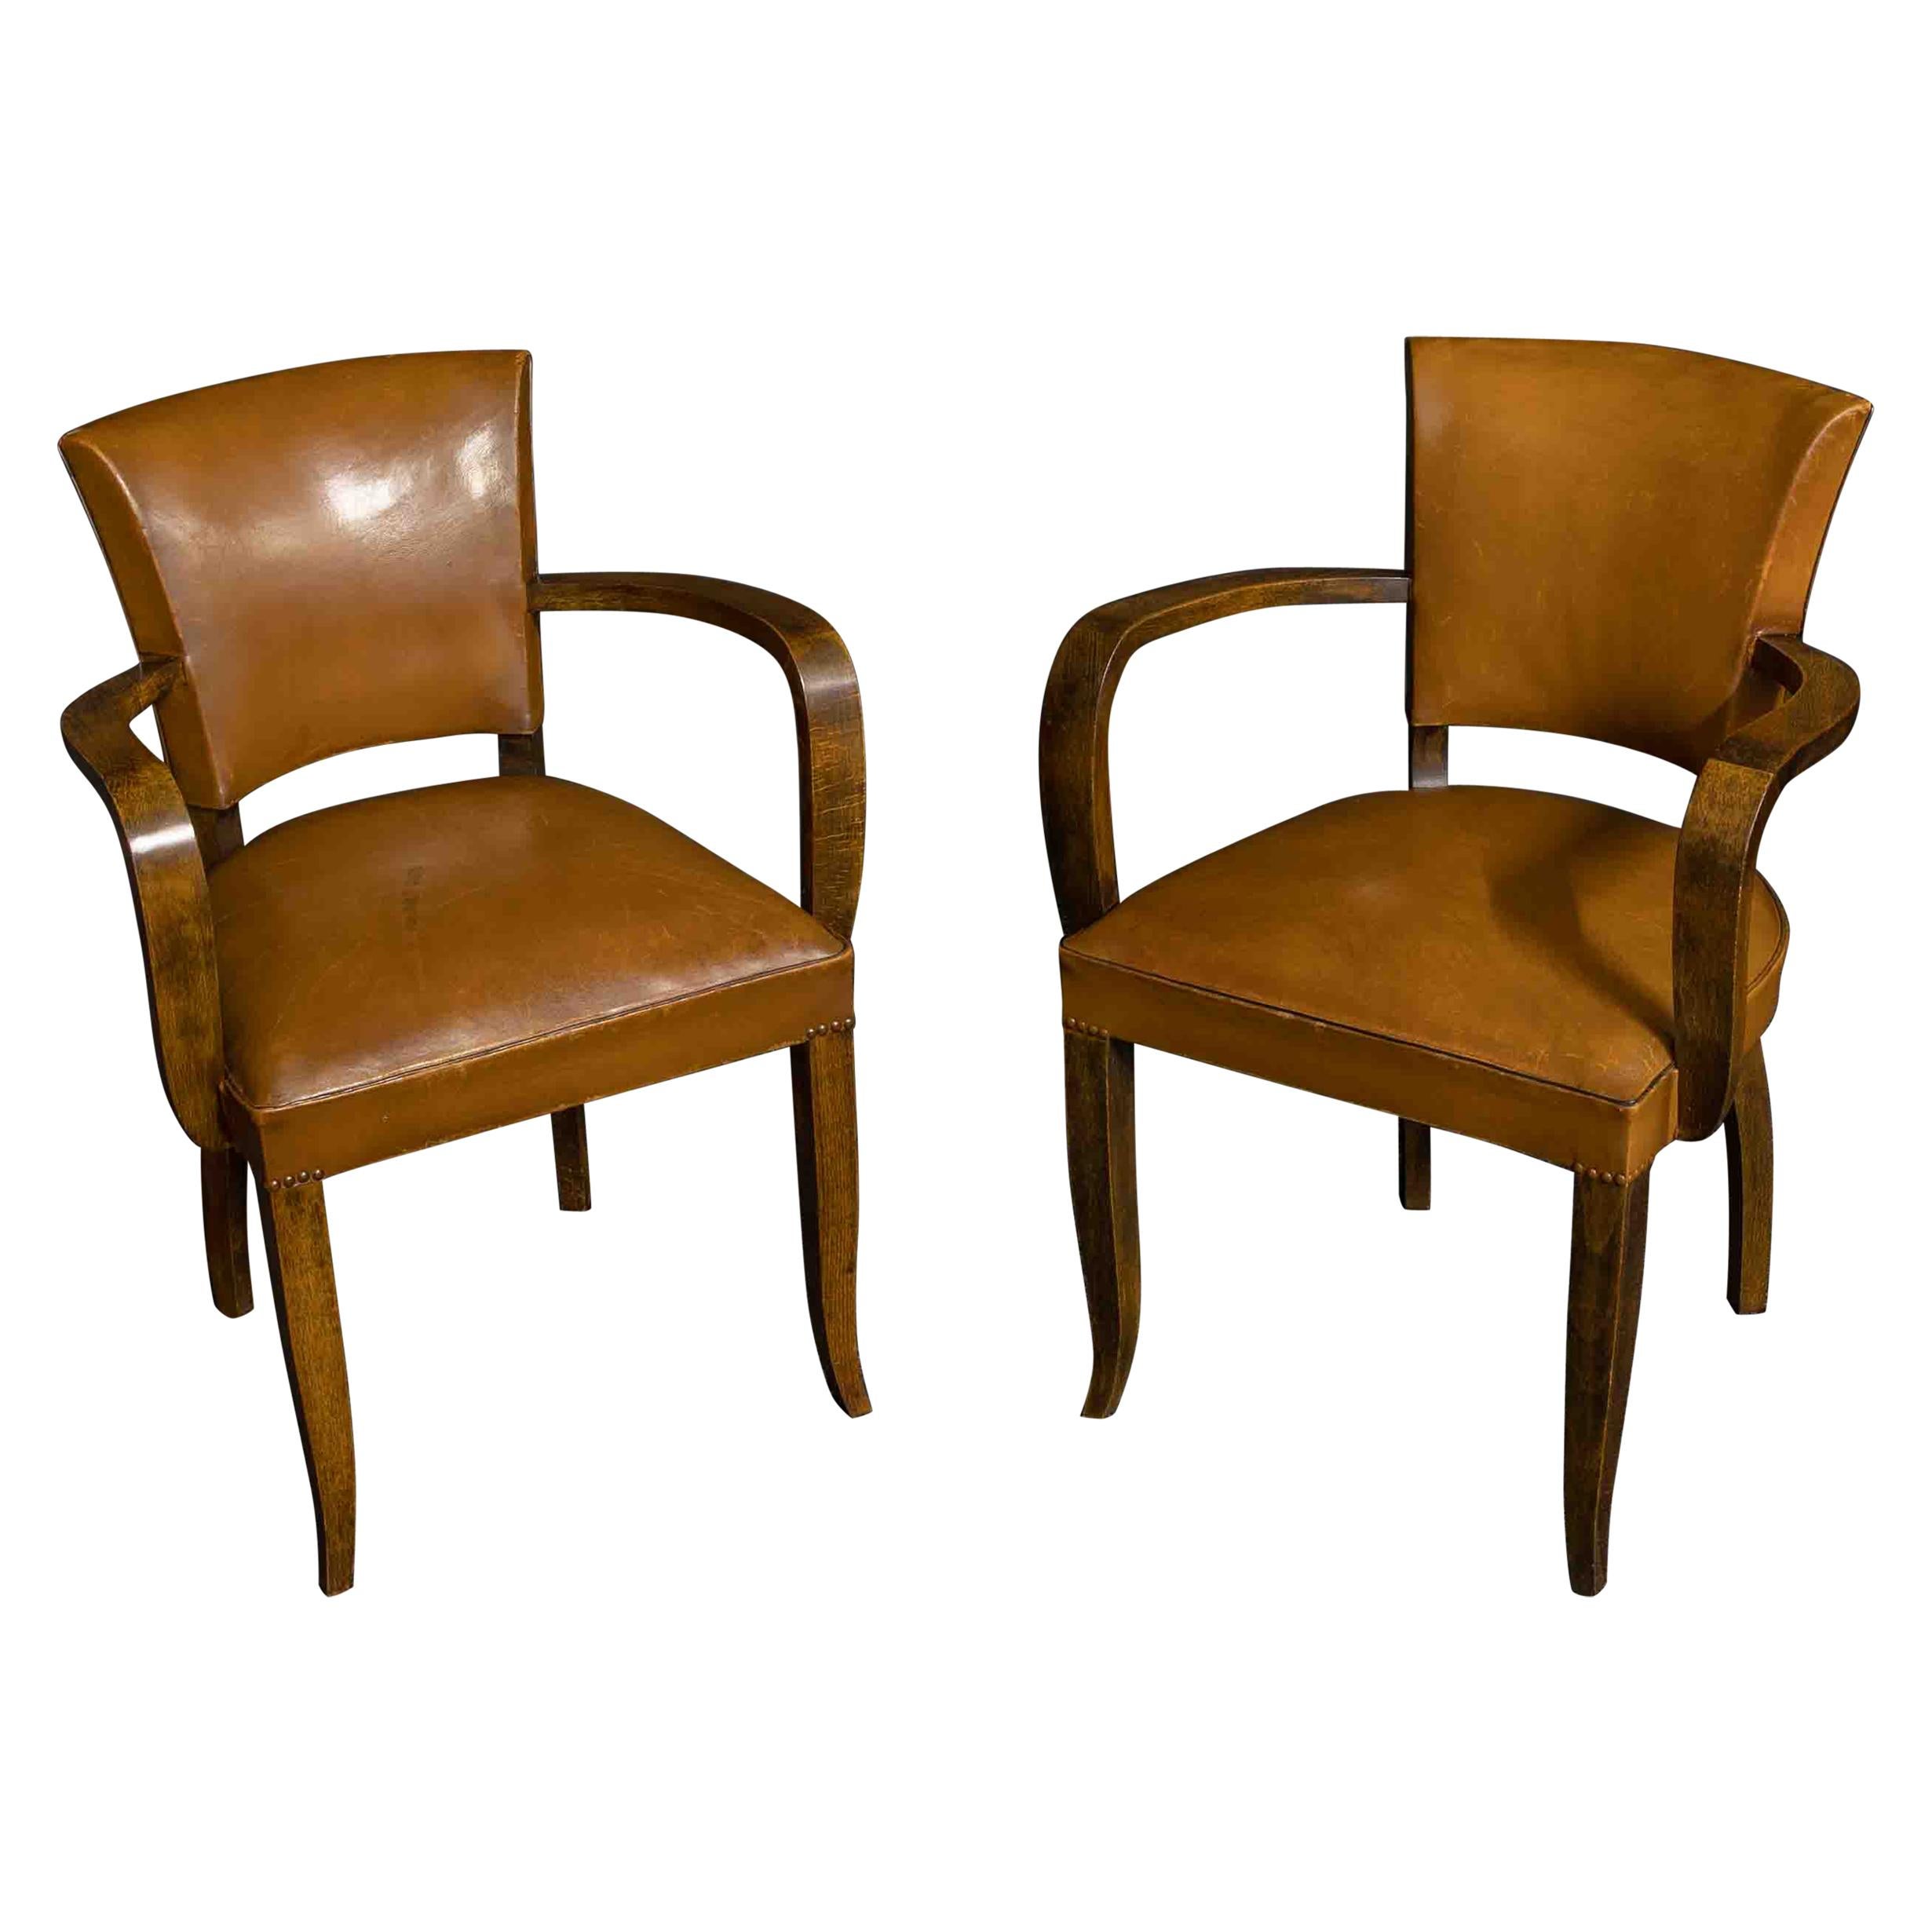 Pair of Art Deco Chairs by OXEDOU